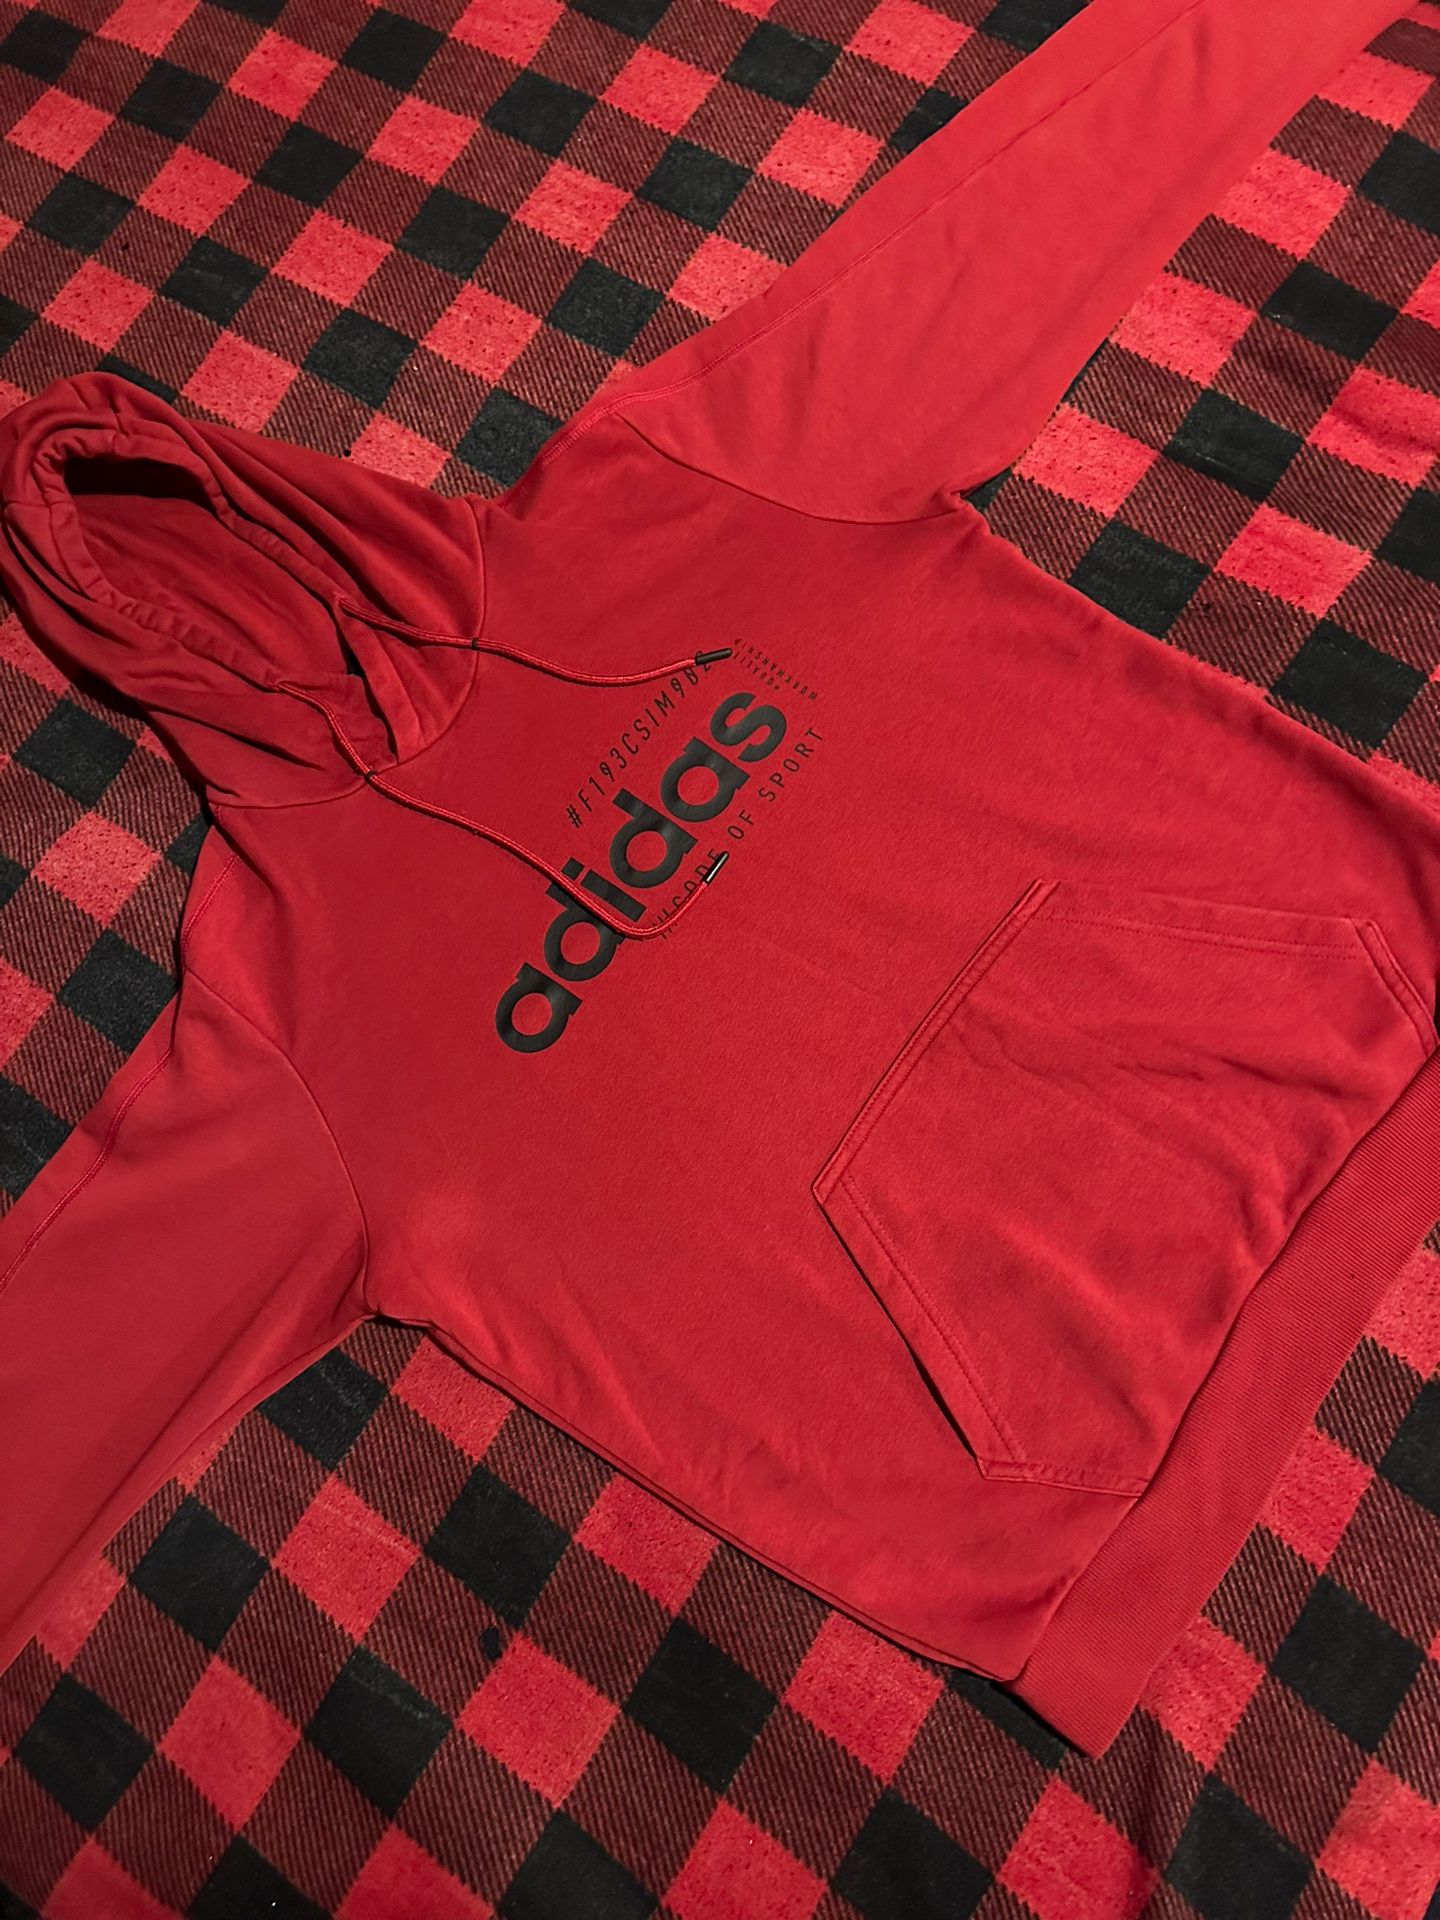 Medium Red Adidas Hoodie In Great Condition